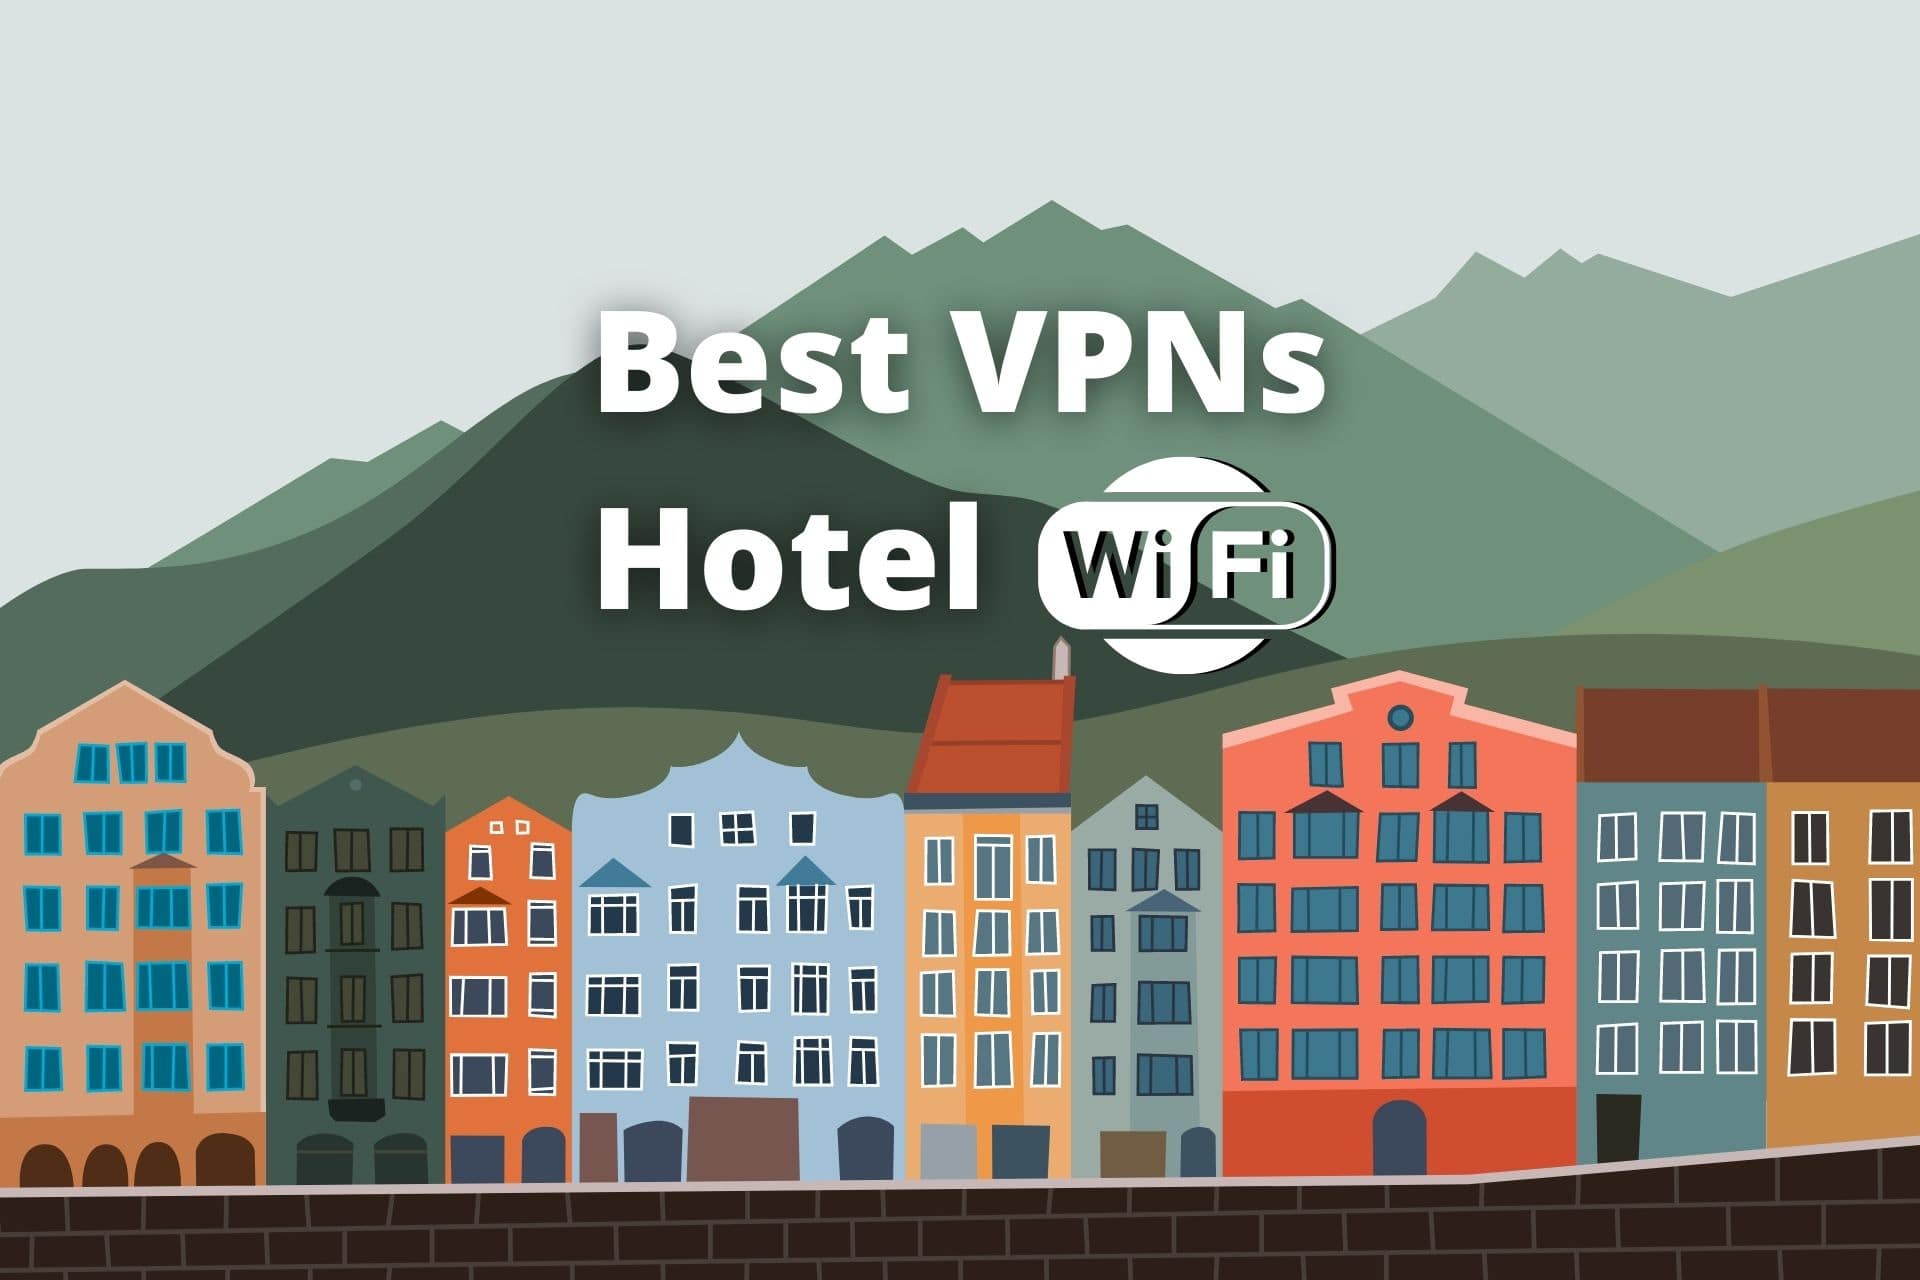 5 best VPNs for Hotel Wi-Fi to stay safe & unblock websites